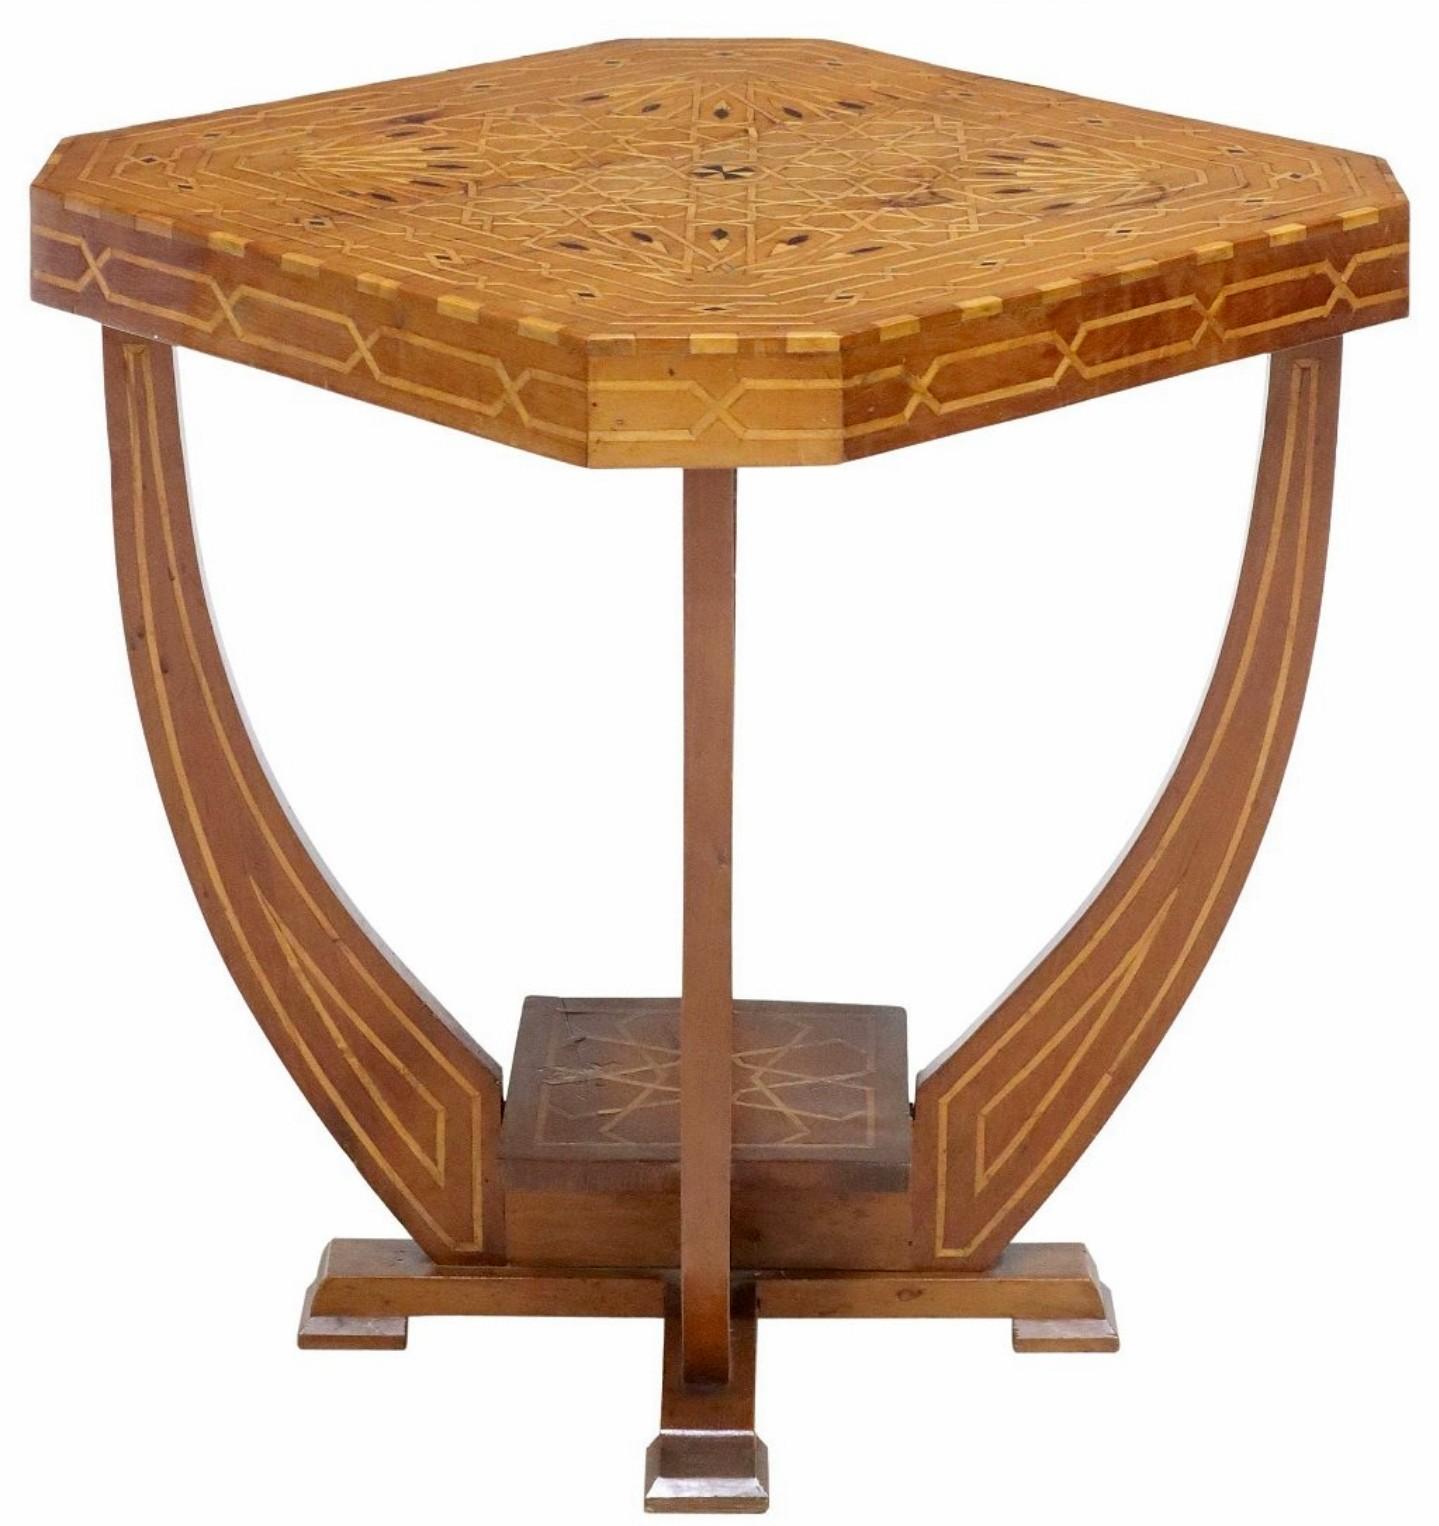 Italian Art Deco Period Parquetry Table circa 1930s  In Good Condition For Sale In Forney, TX